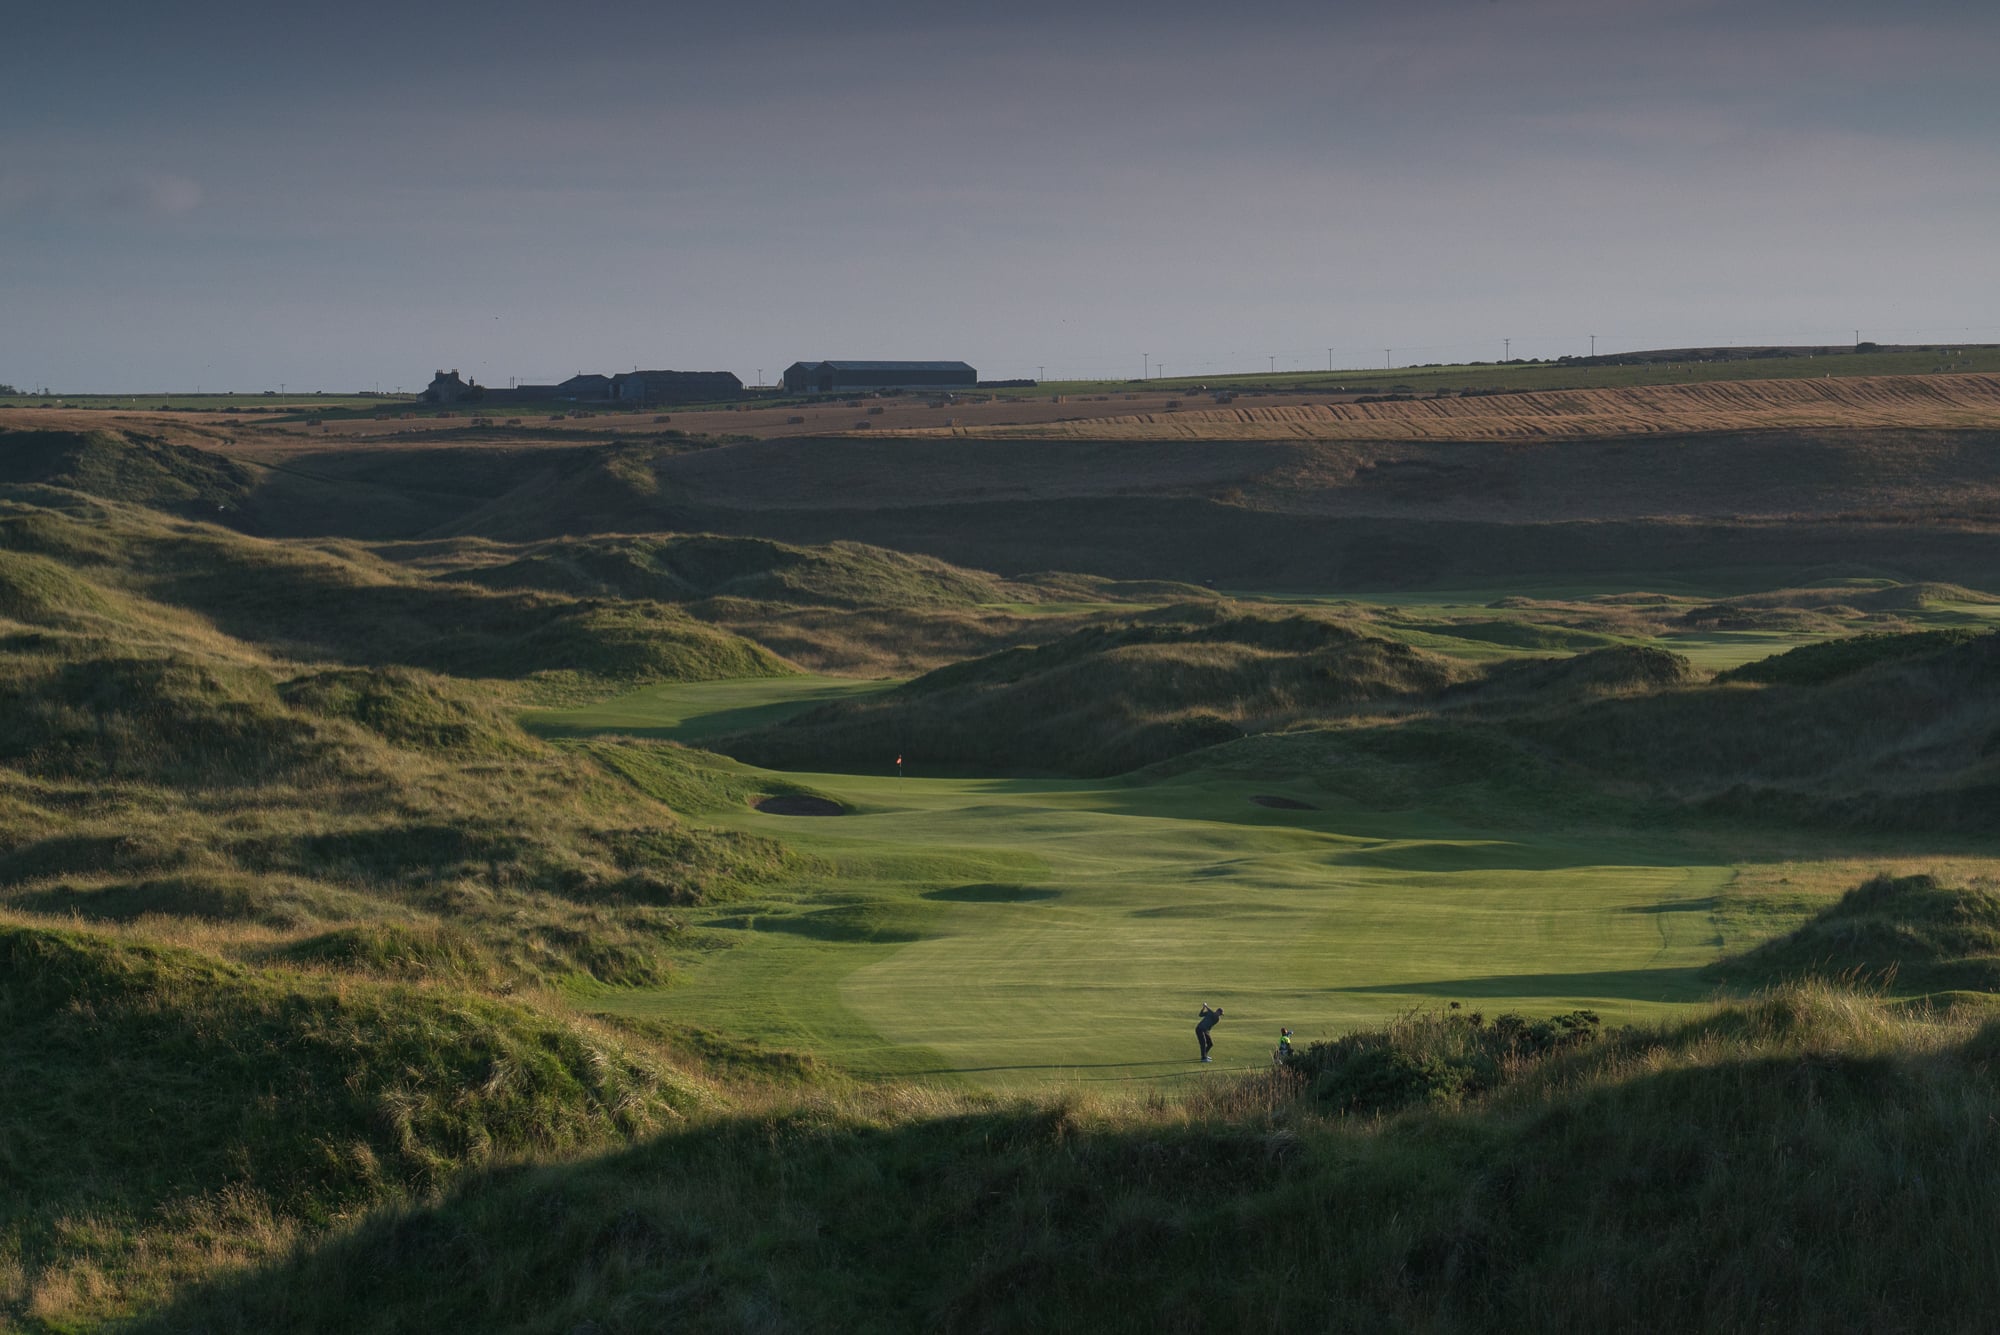 Image of a golfer on the 5th hole of the Cruden Bay Championship Links Golf Course, Aberdeenshire, Scotland